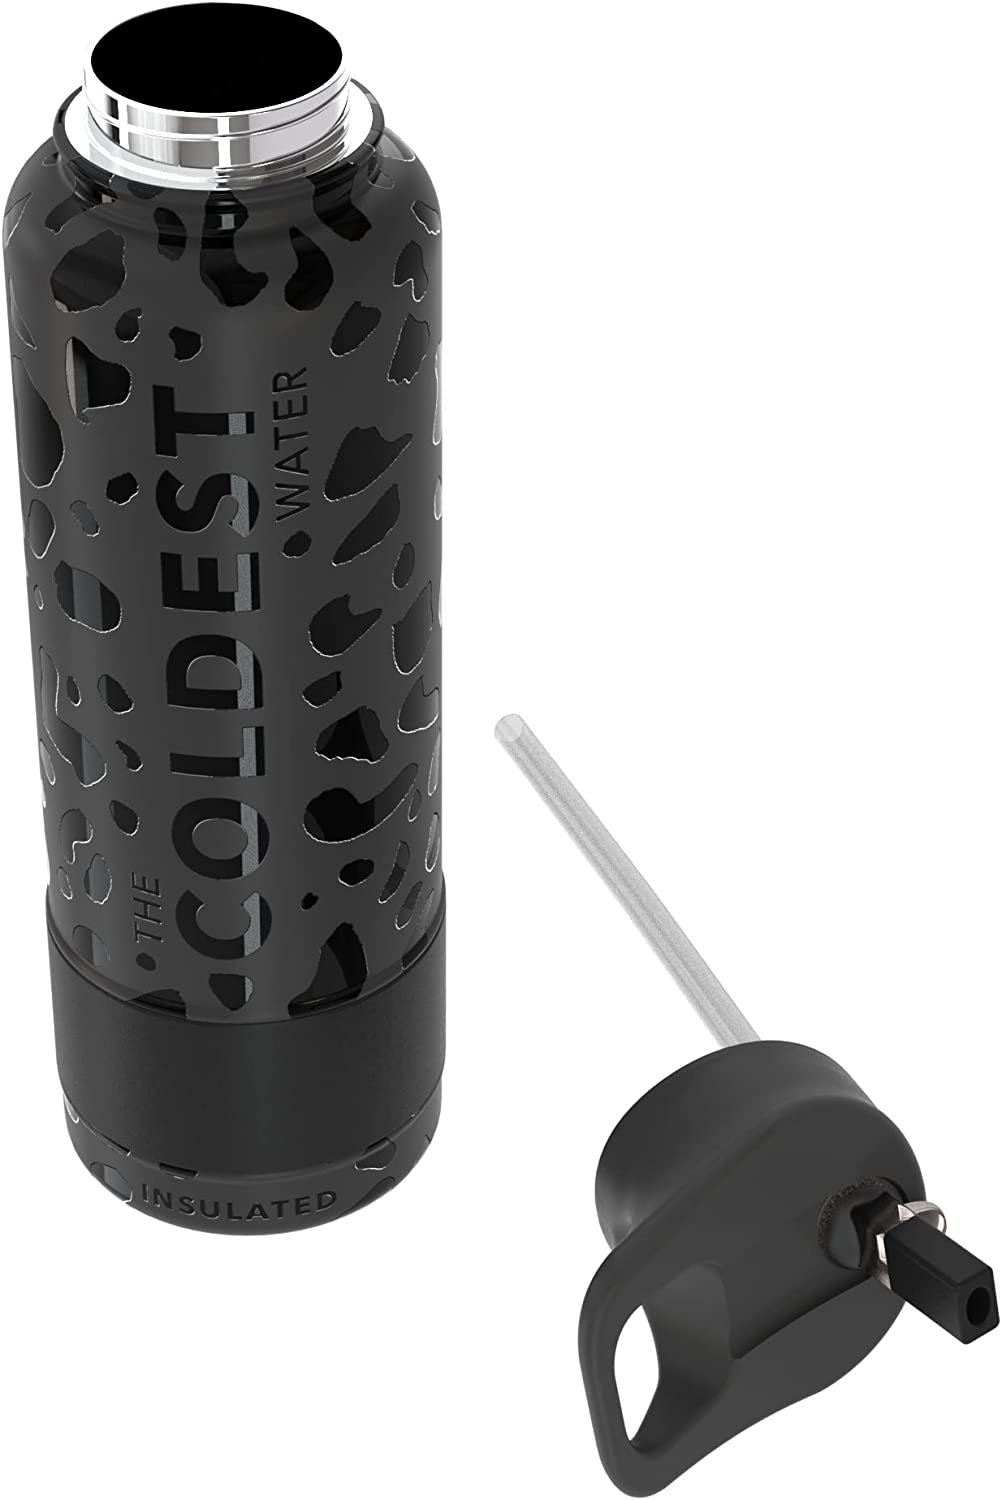 THE COLDEST WATER BOTTLE REVIEW! 